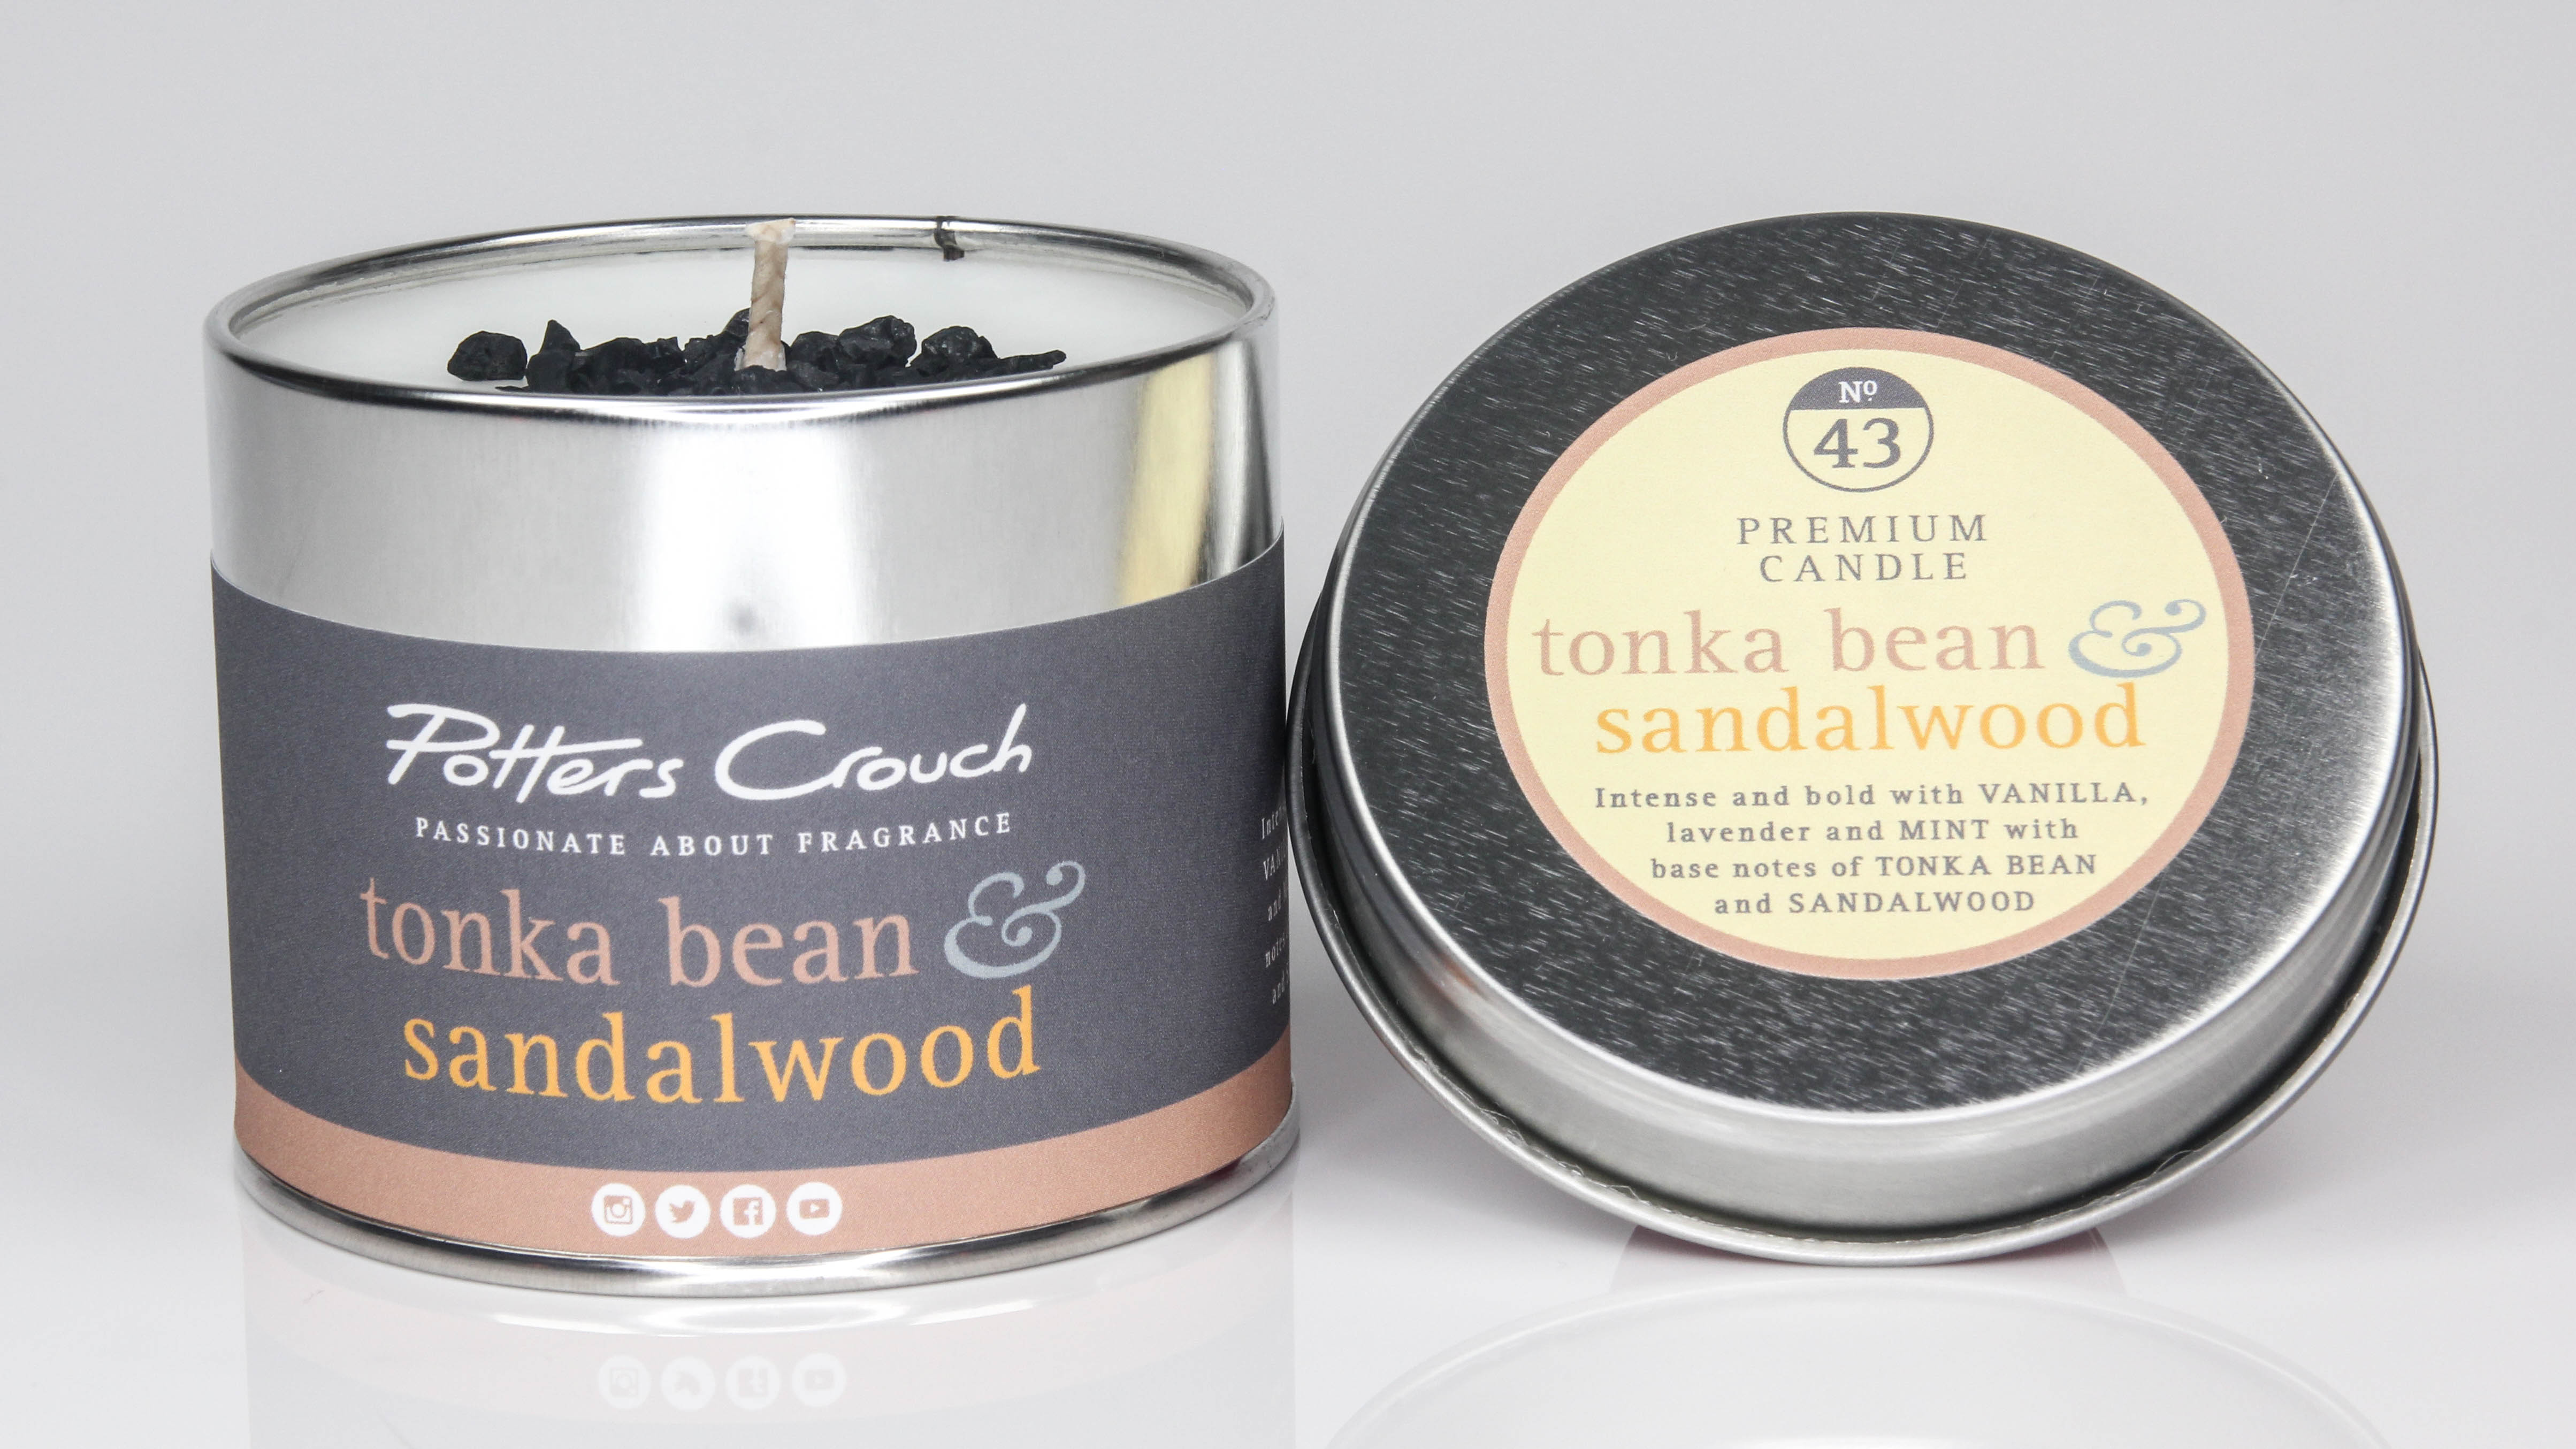 Tonka Bean & Warm Sandalwood - Scented Candle in a Tin - Potters Crouch